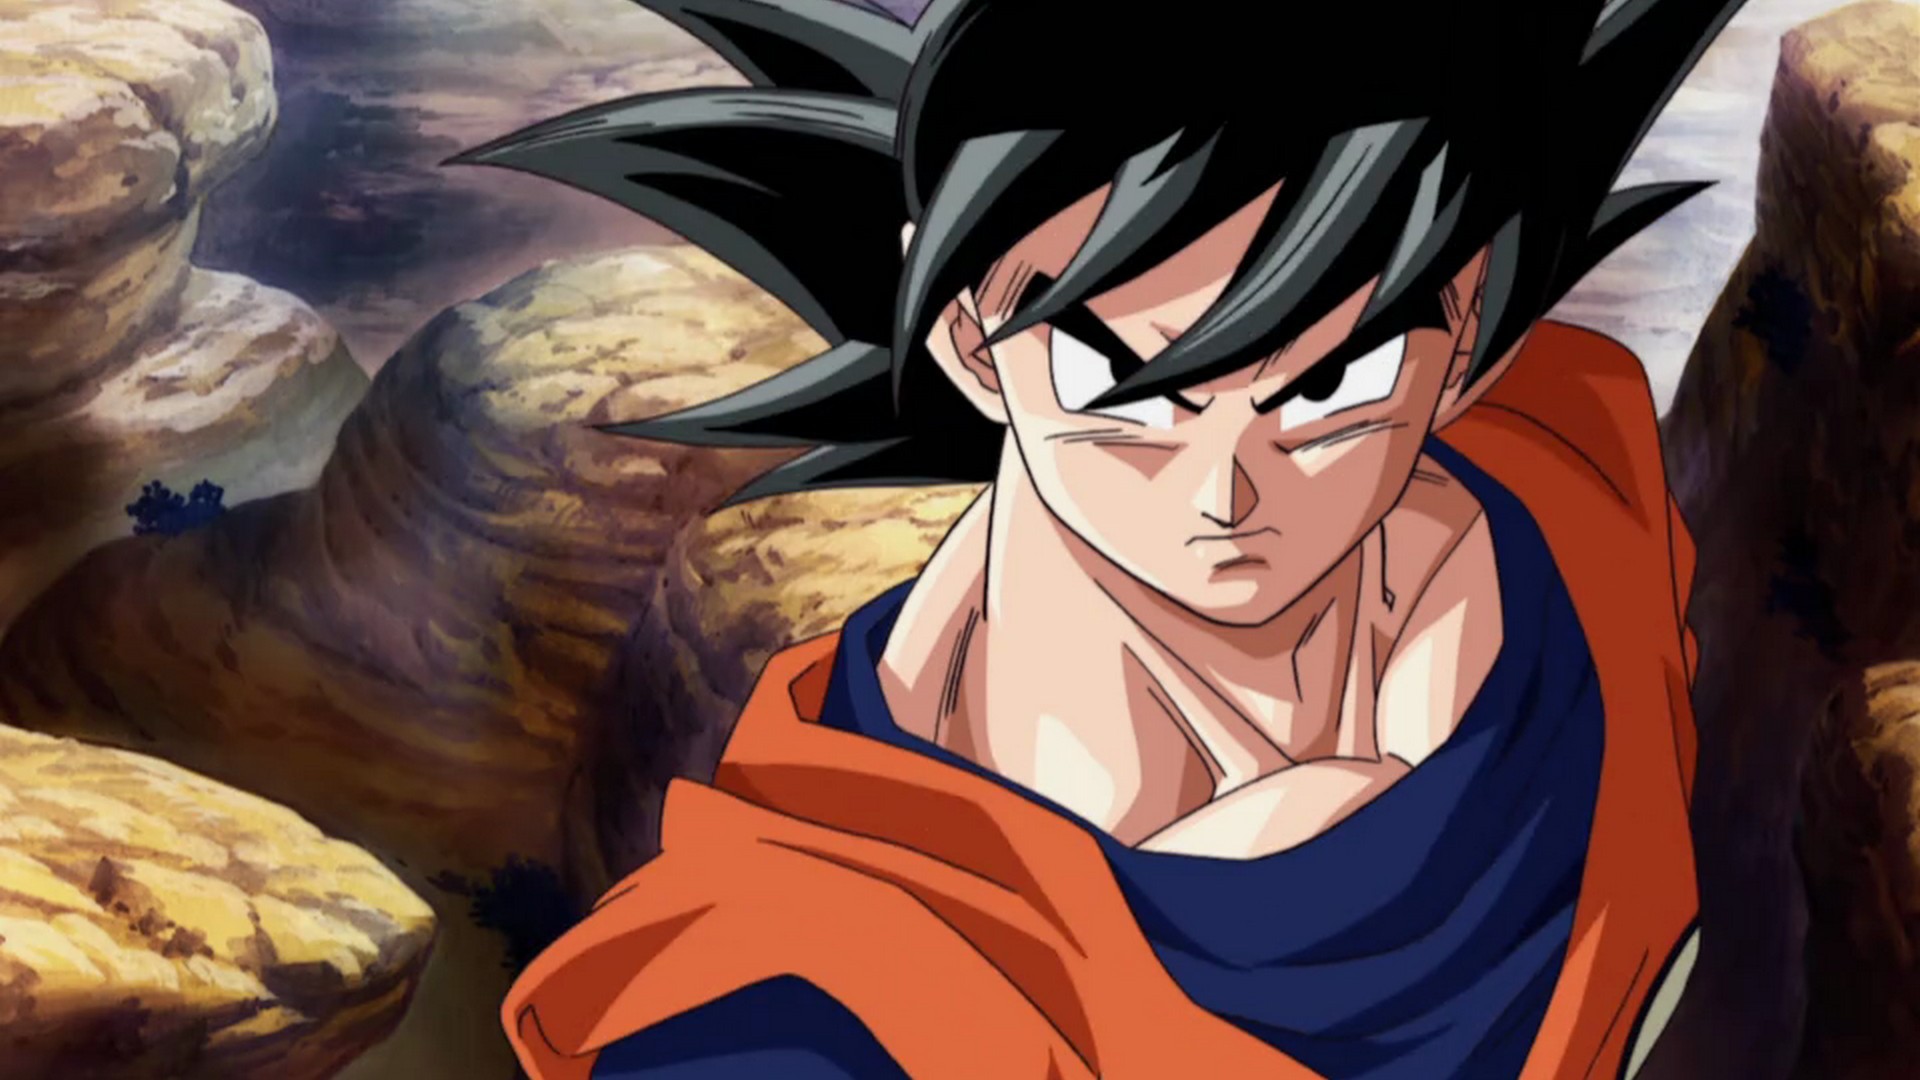 Wallpaper Goku with resolution 1920X1080 pixel. You can use this wallpaper as background for your desktop Computer Screensavers, Android or iPhone smartphones